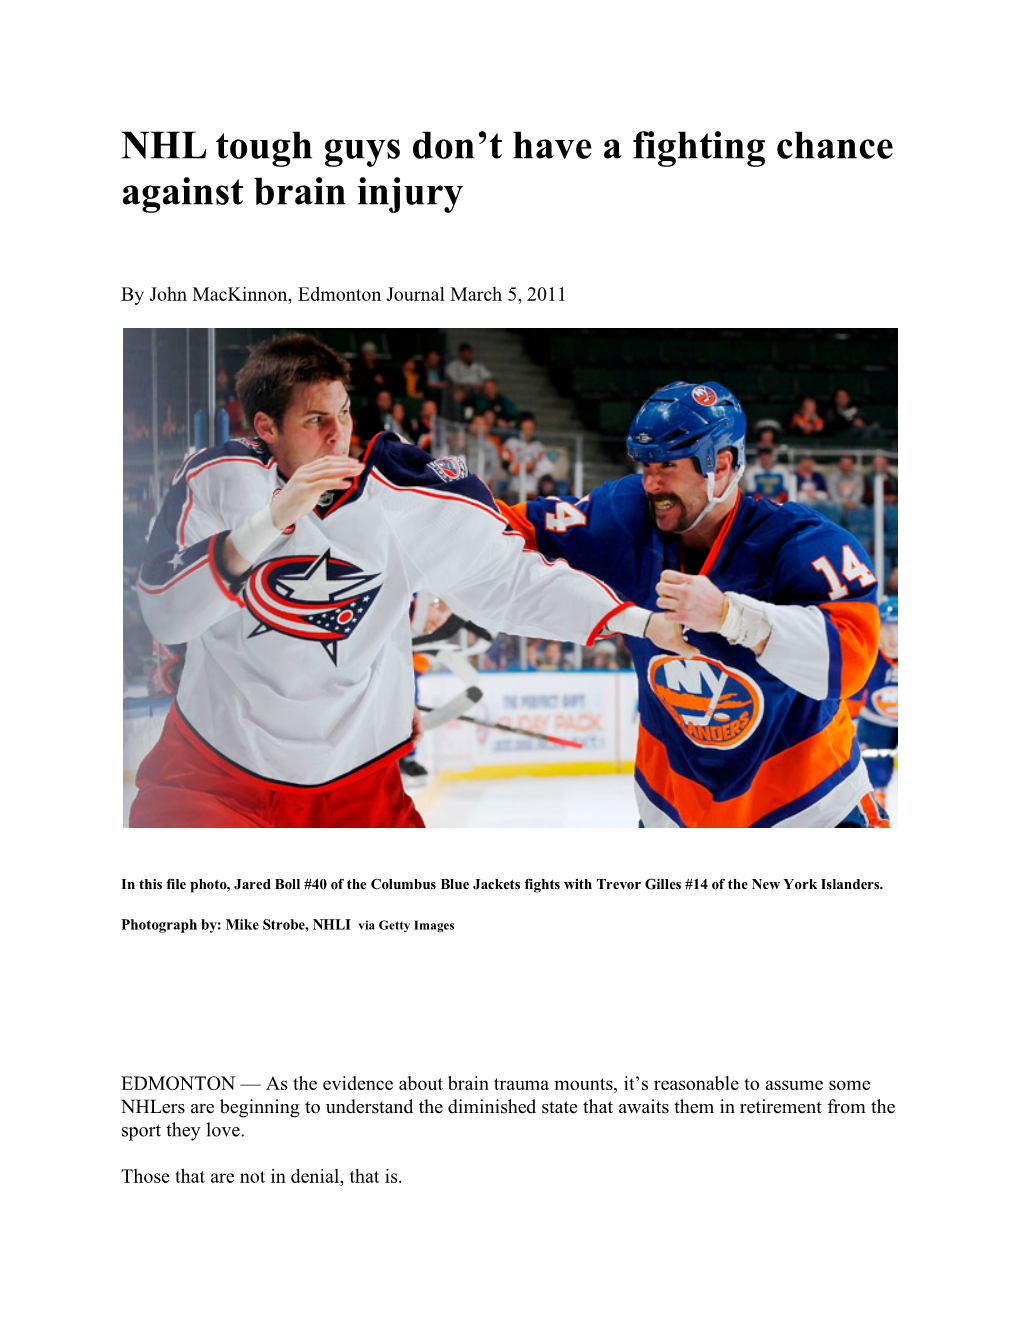 NHL Tough Guys Don't Have a Fighting Chance Against Brain Injury